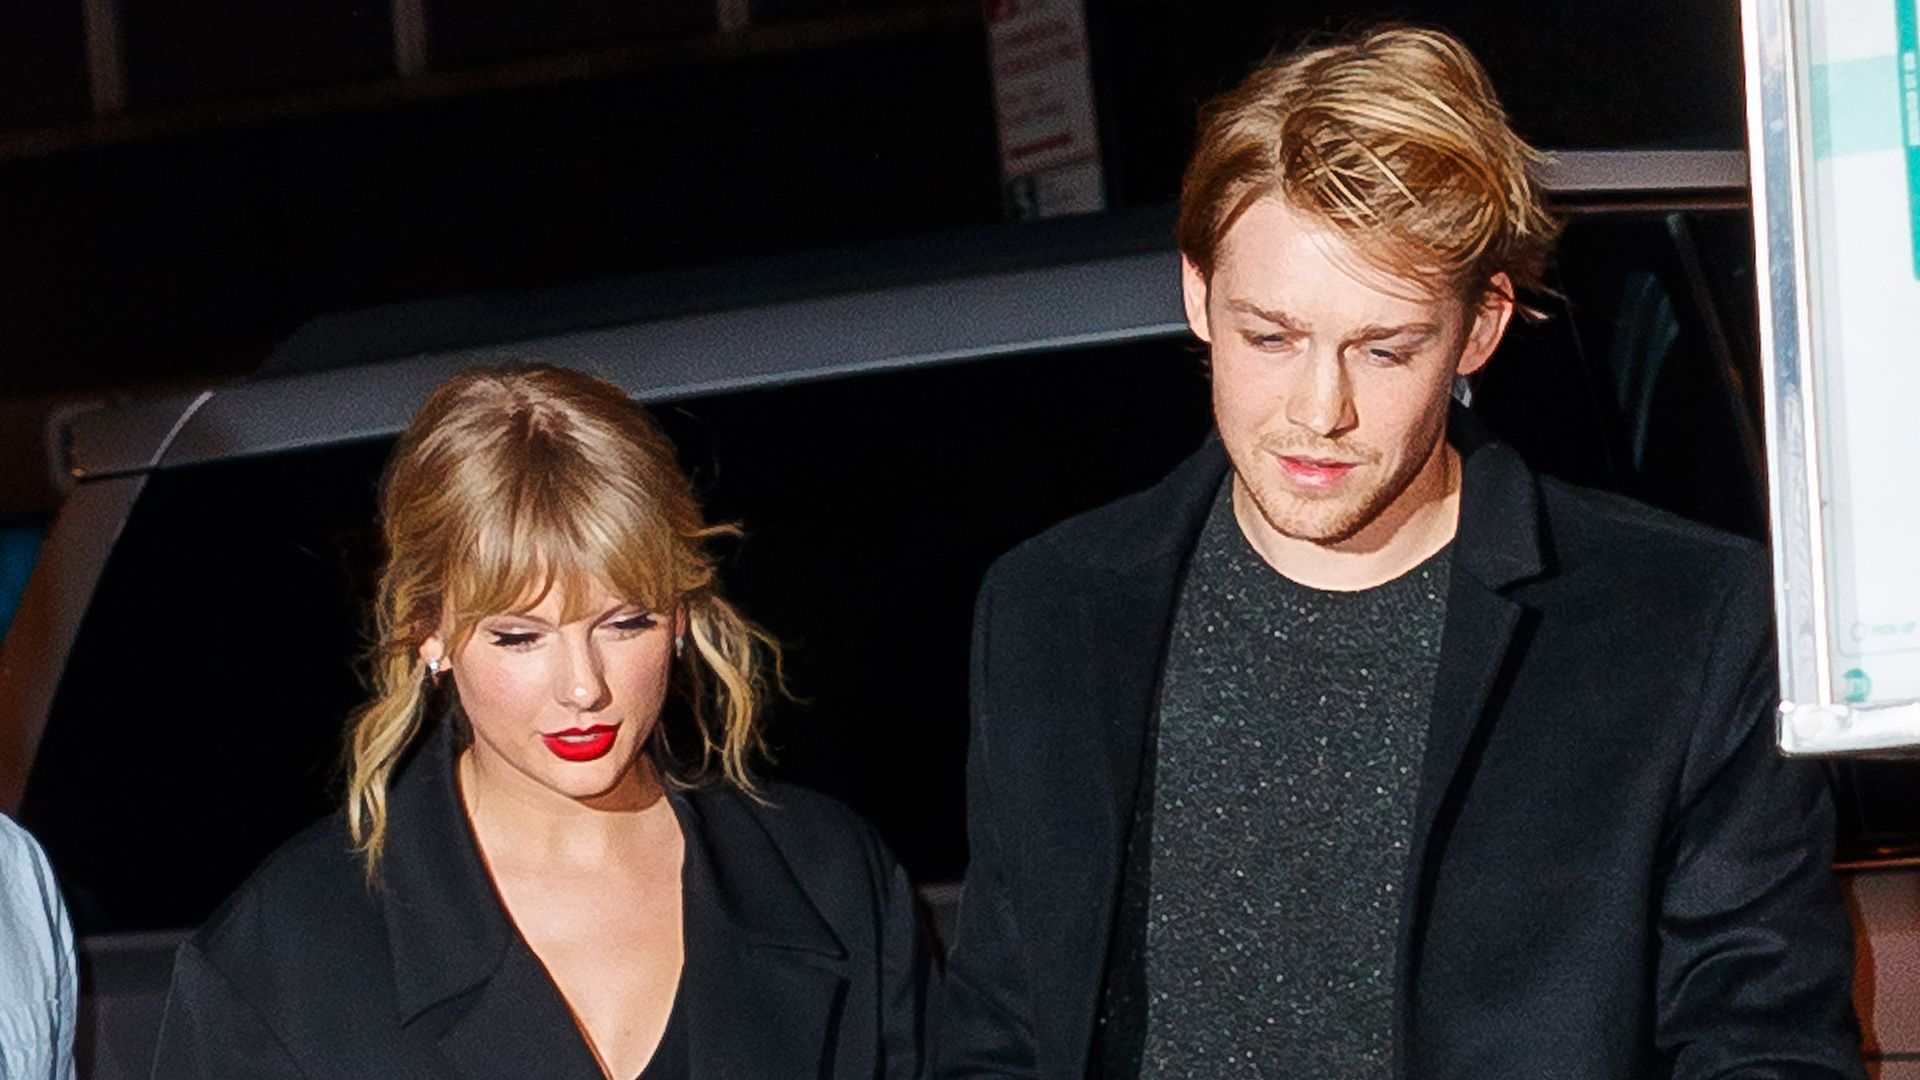 Taylor Swift and Joe Alwyn arrive at Zuma on October 06, 2019 in New York City